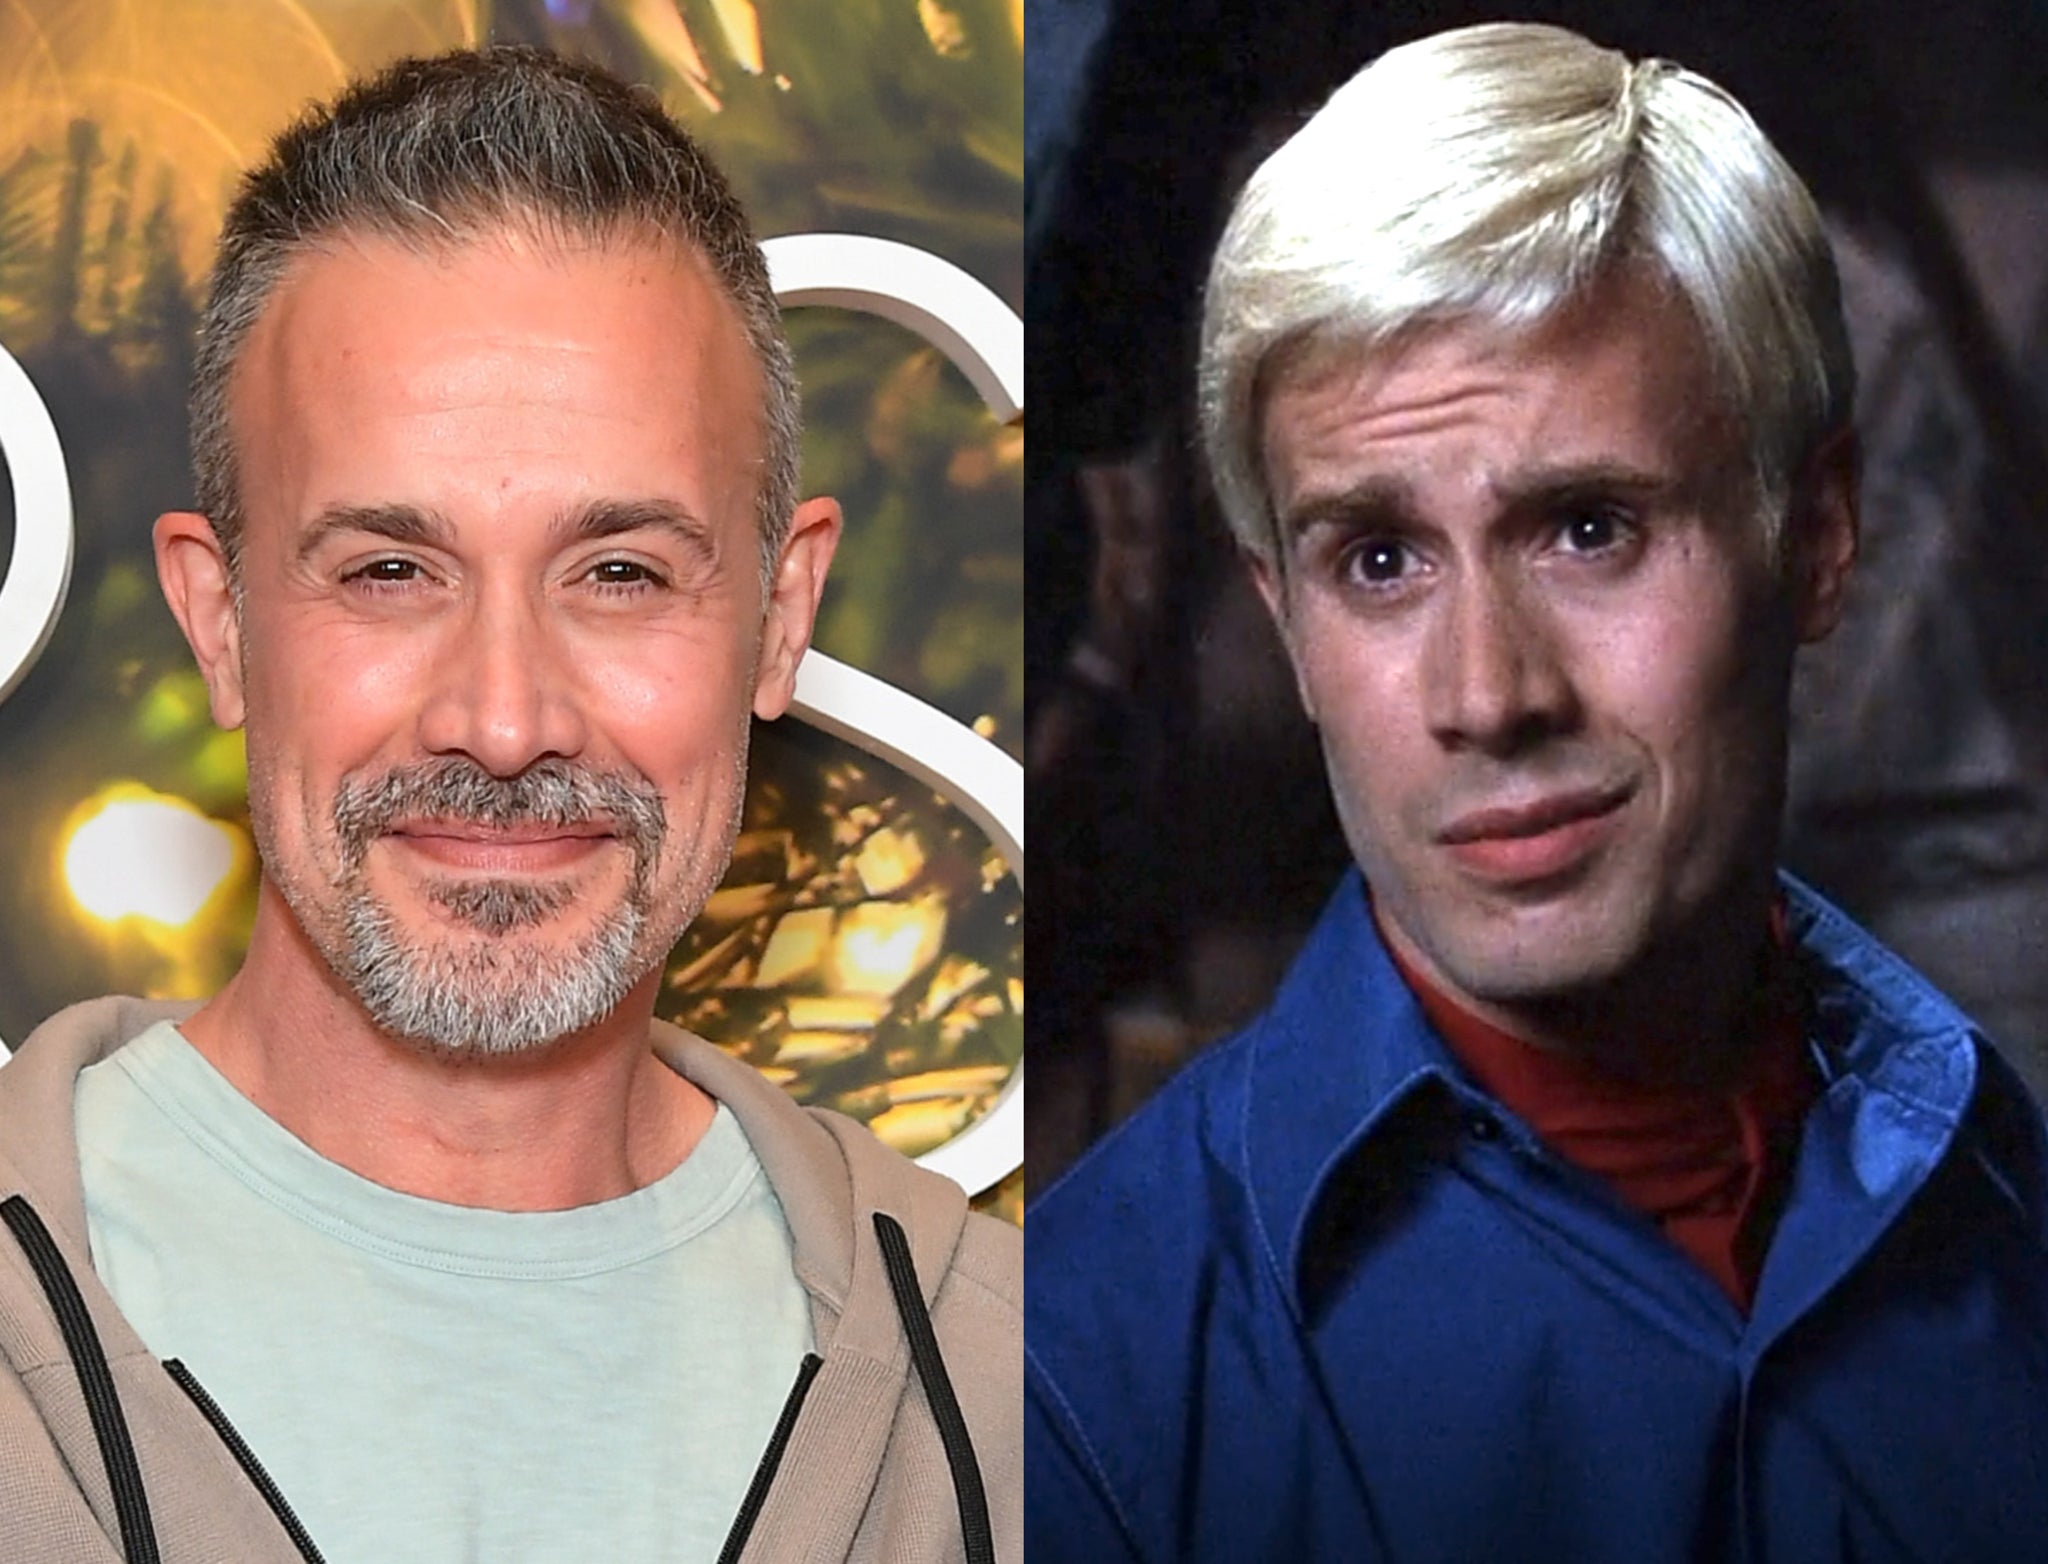 Freddie Prinze Jr played Fred Jones in the Scooby-Doo live action movies